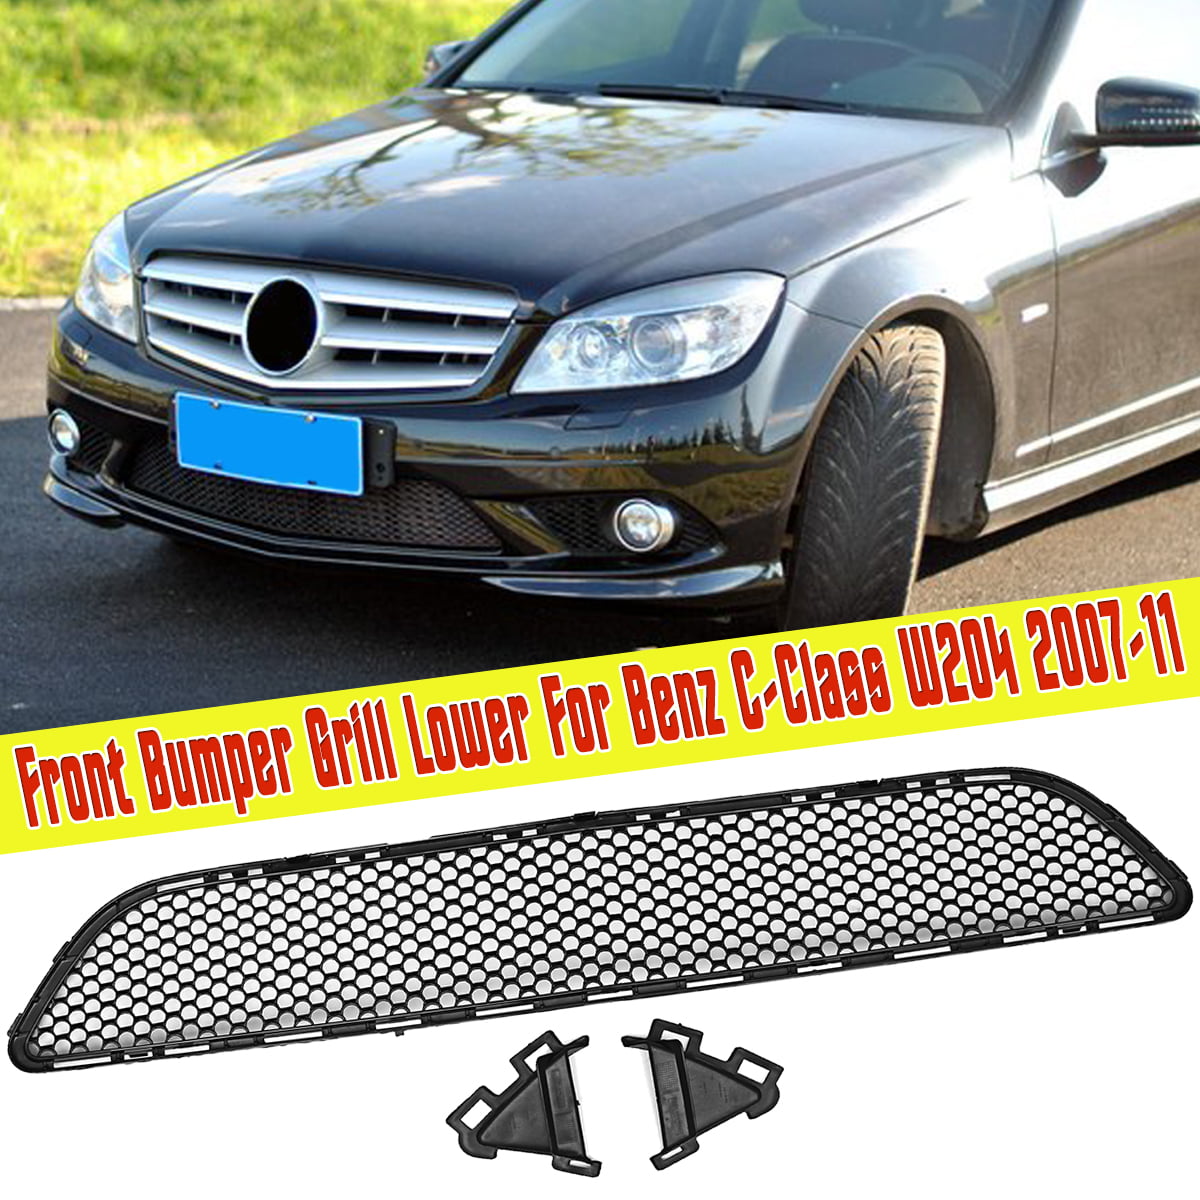 Front Bumper Grille Grill Lower Fit For MercedesBenz C